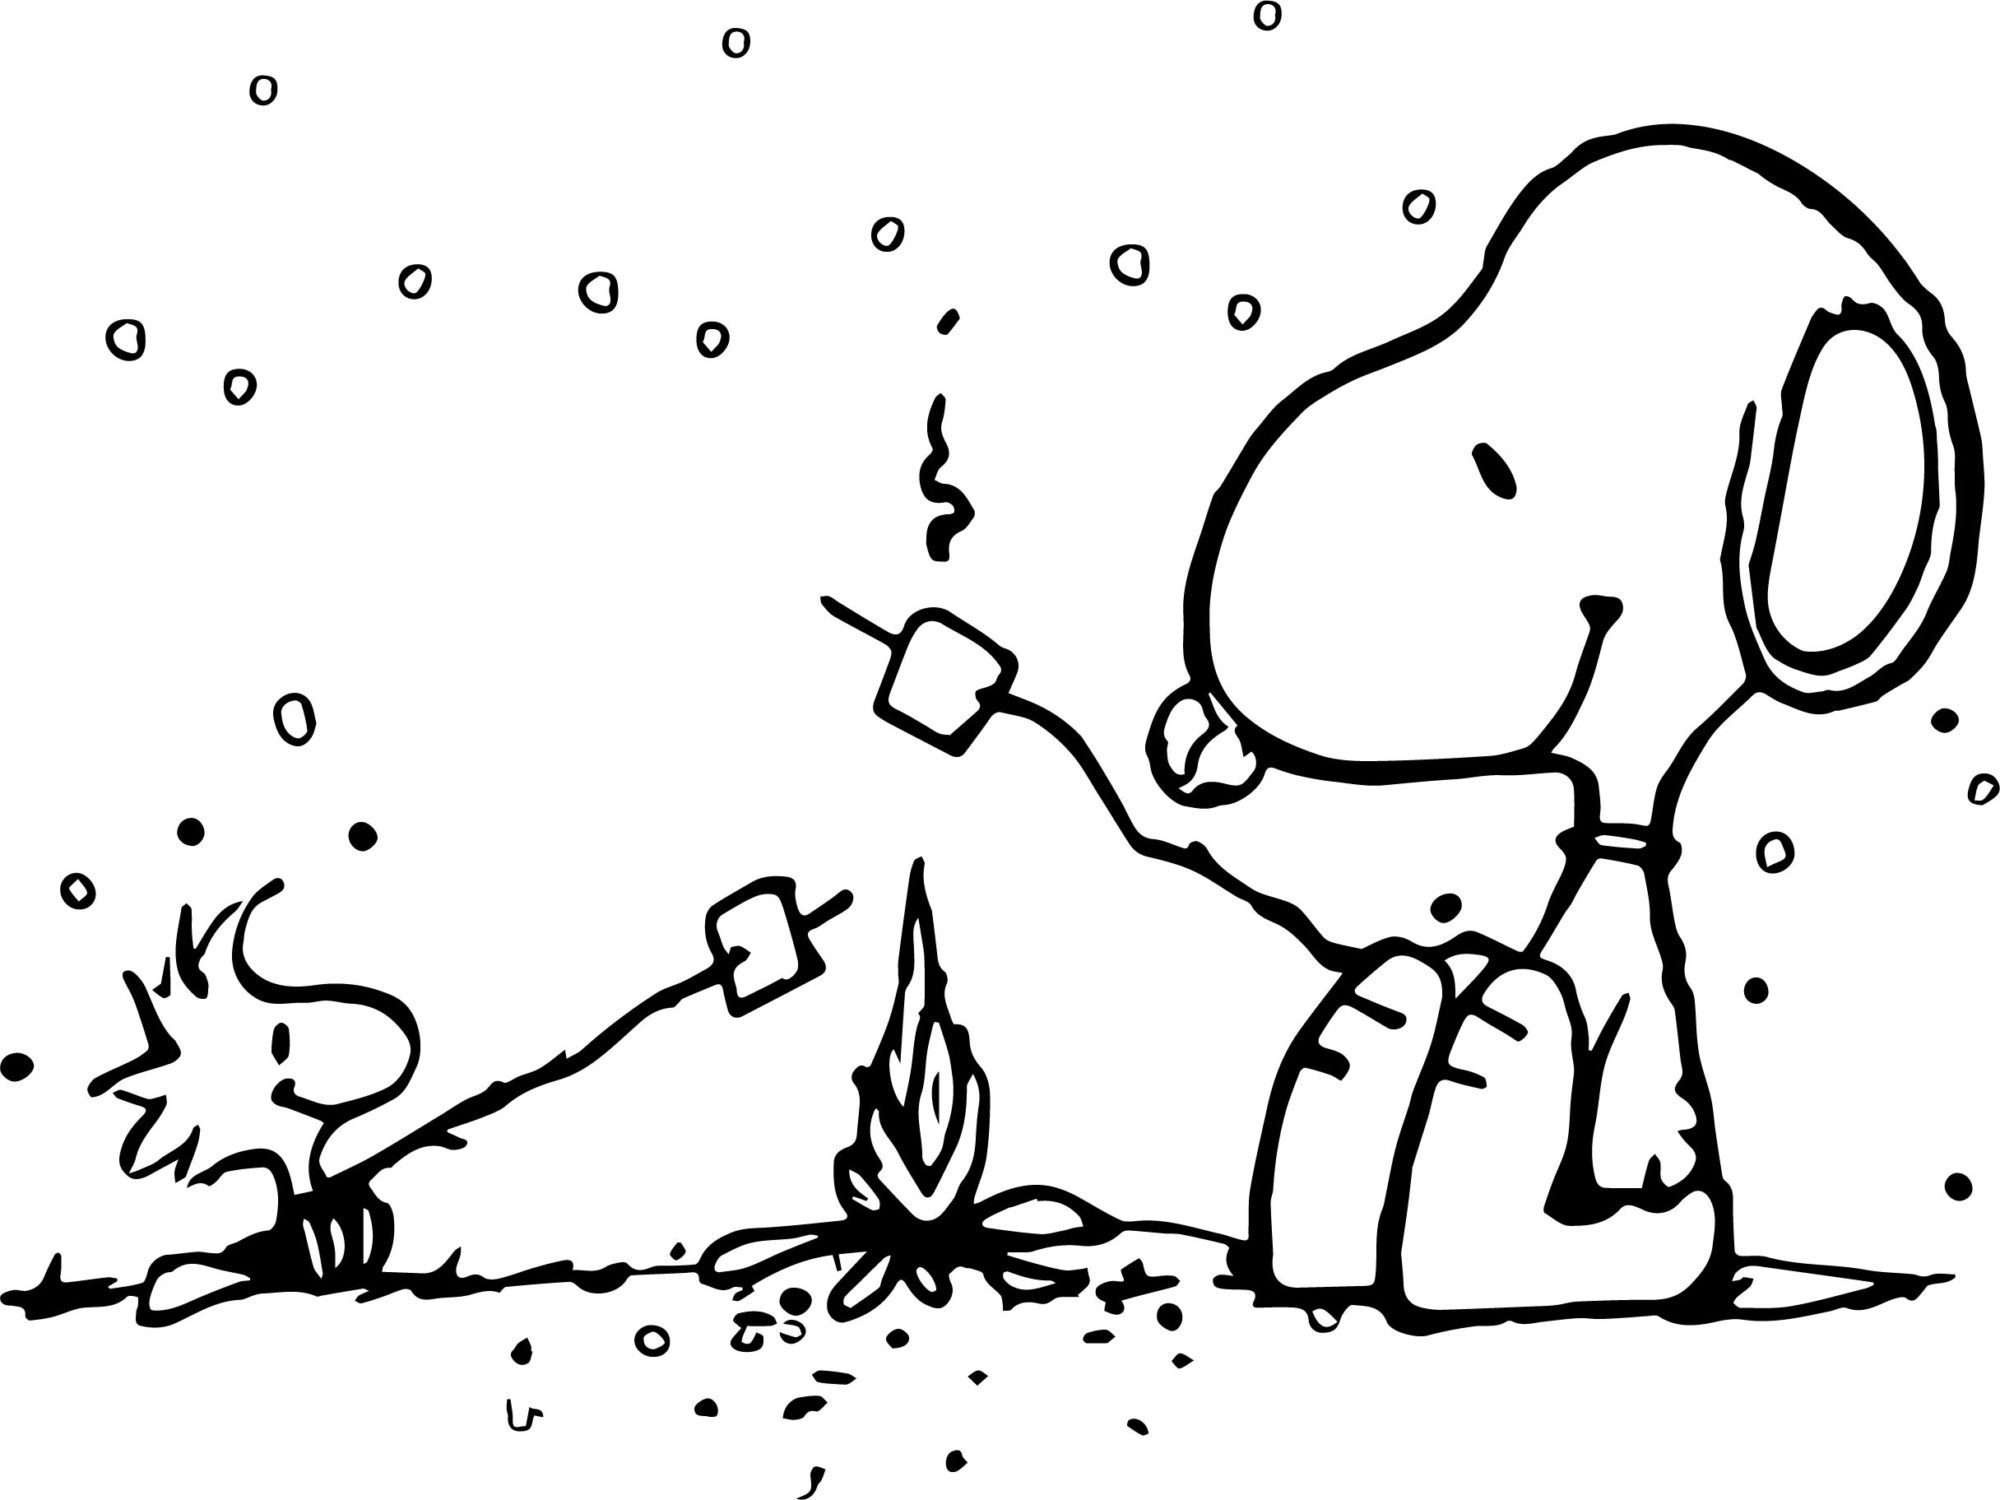 snoopy-winter-scene-coloring-pages